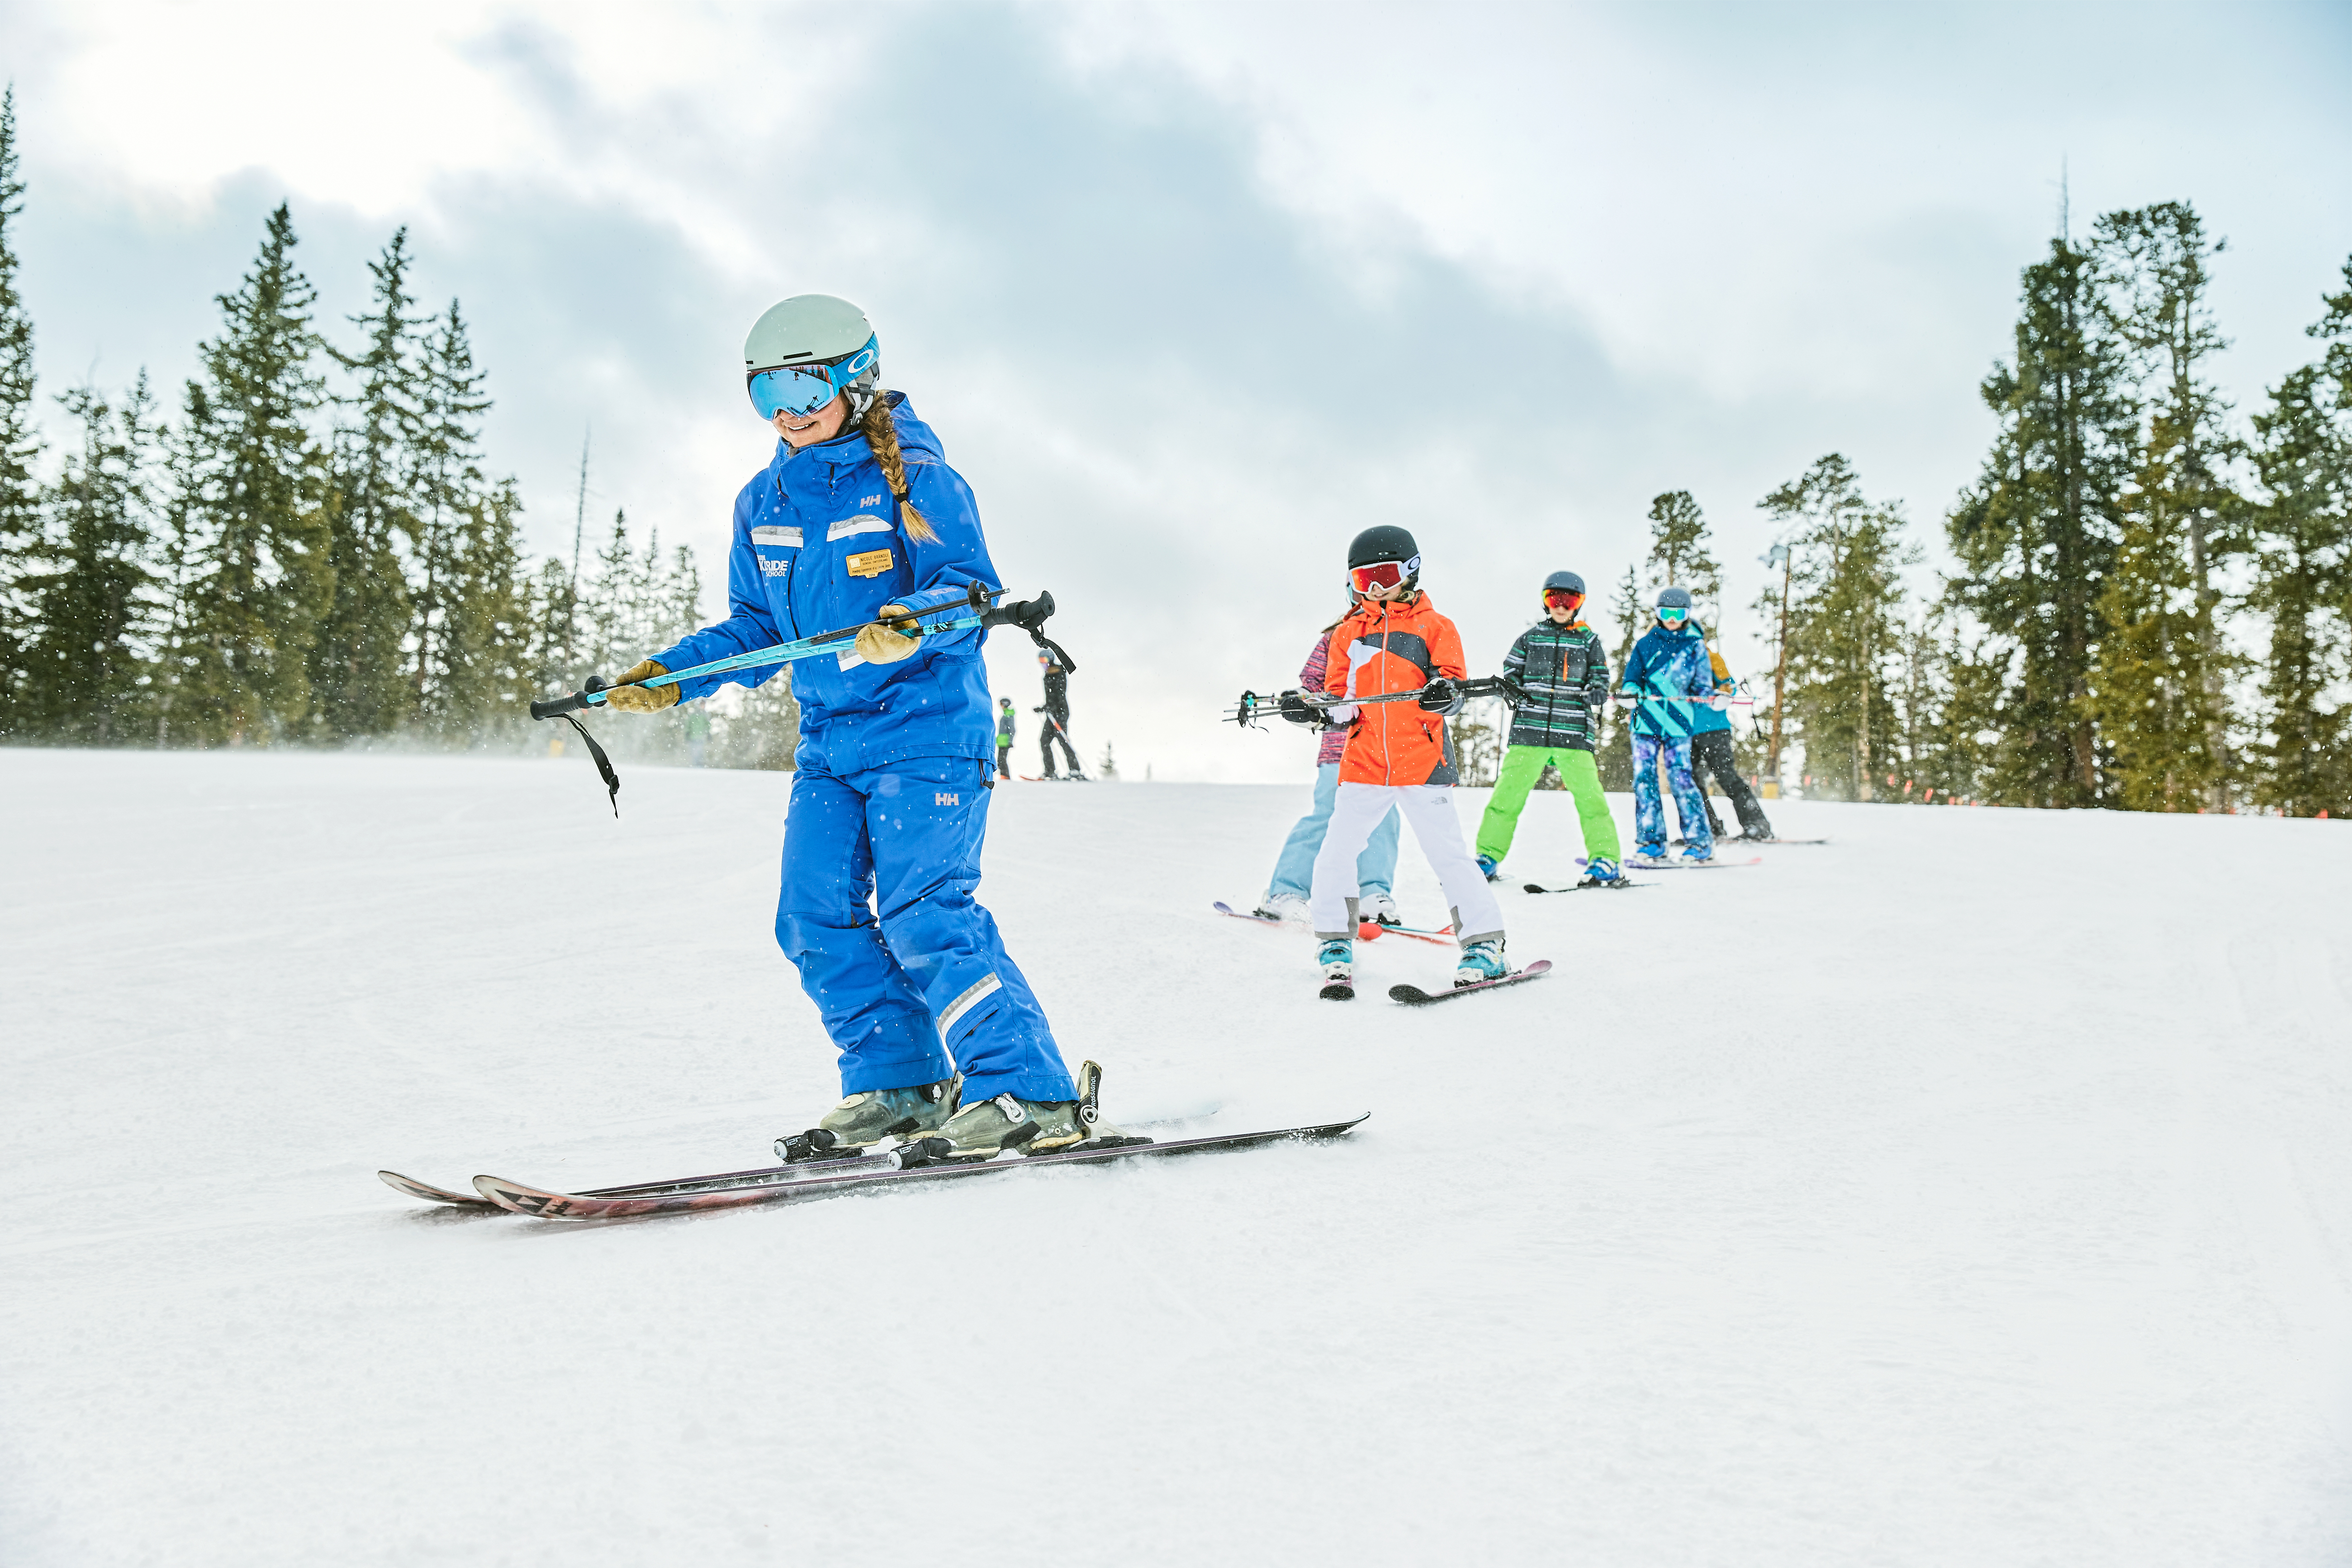 Instructor leading a group of children in a ski lesson at Keystone Resort